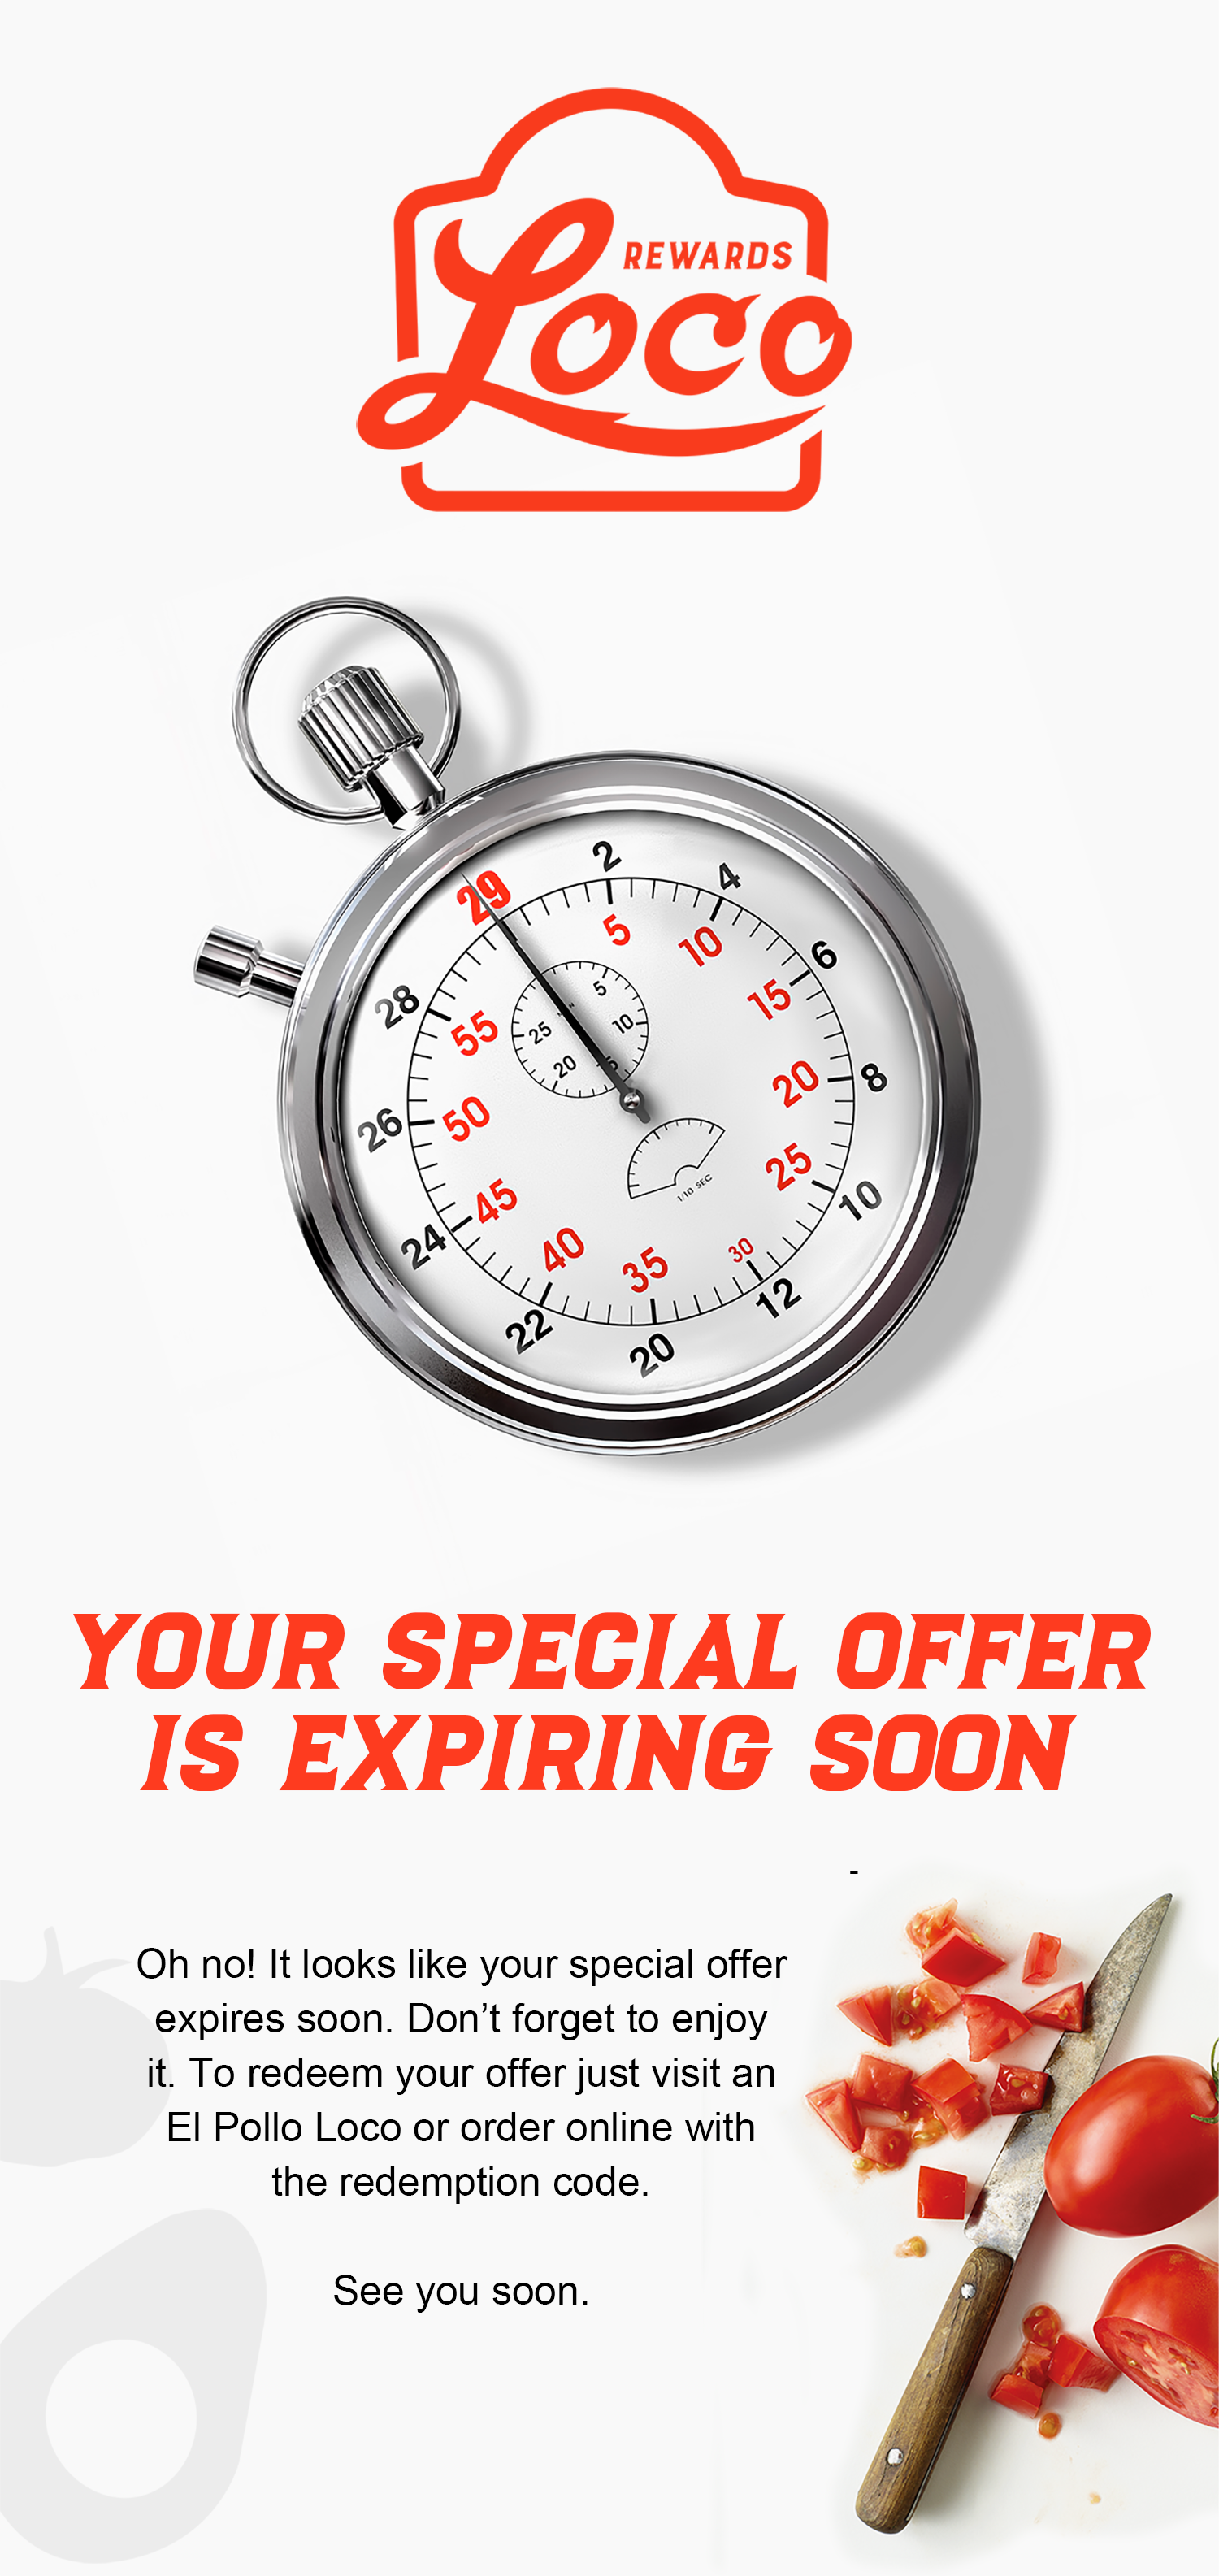 Your Special Offer is Expiring Soon